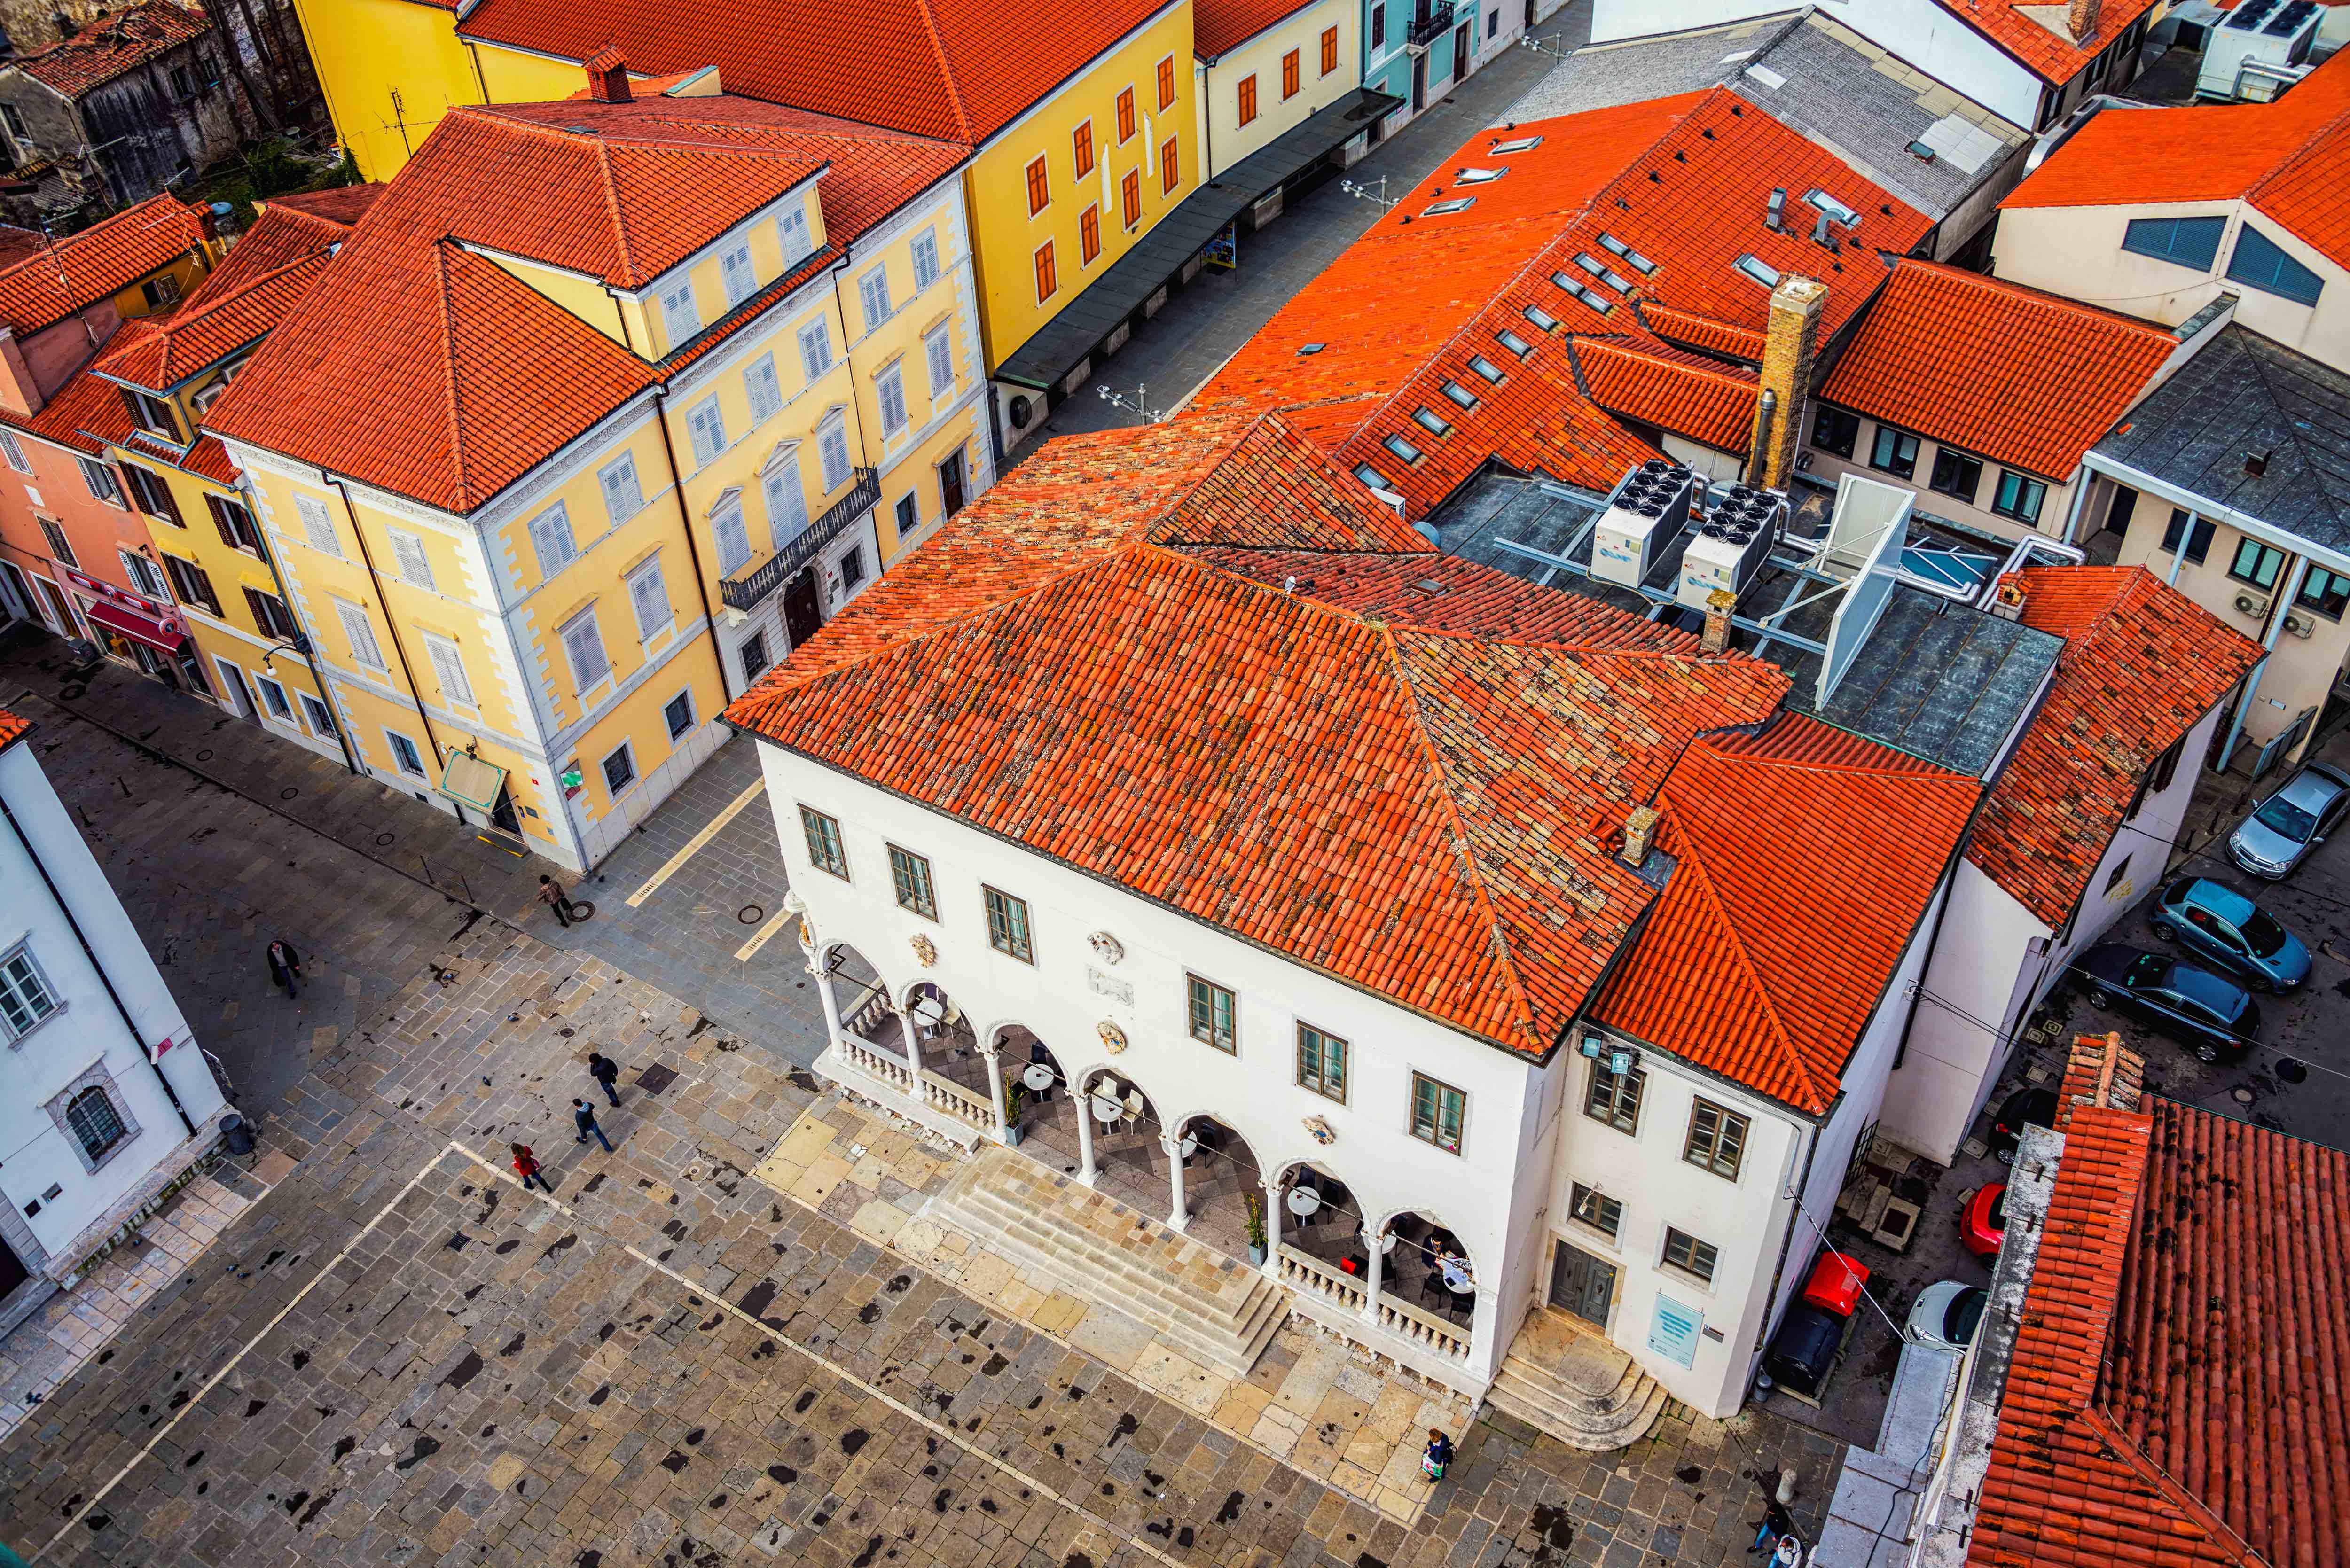 Aerial view of red-tiled roofs in Koper, Slovenia